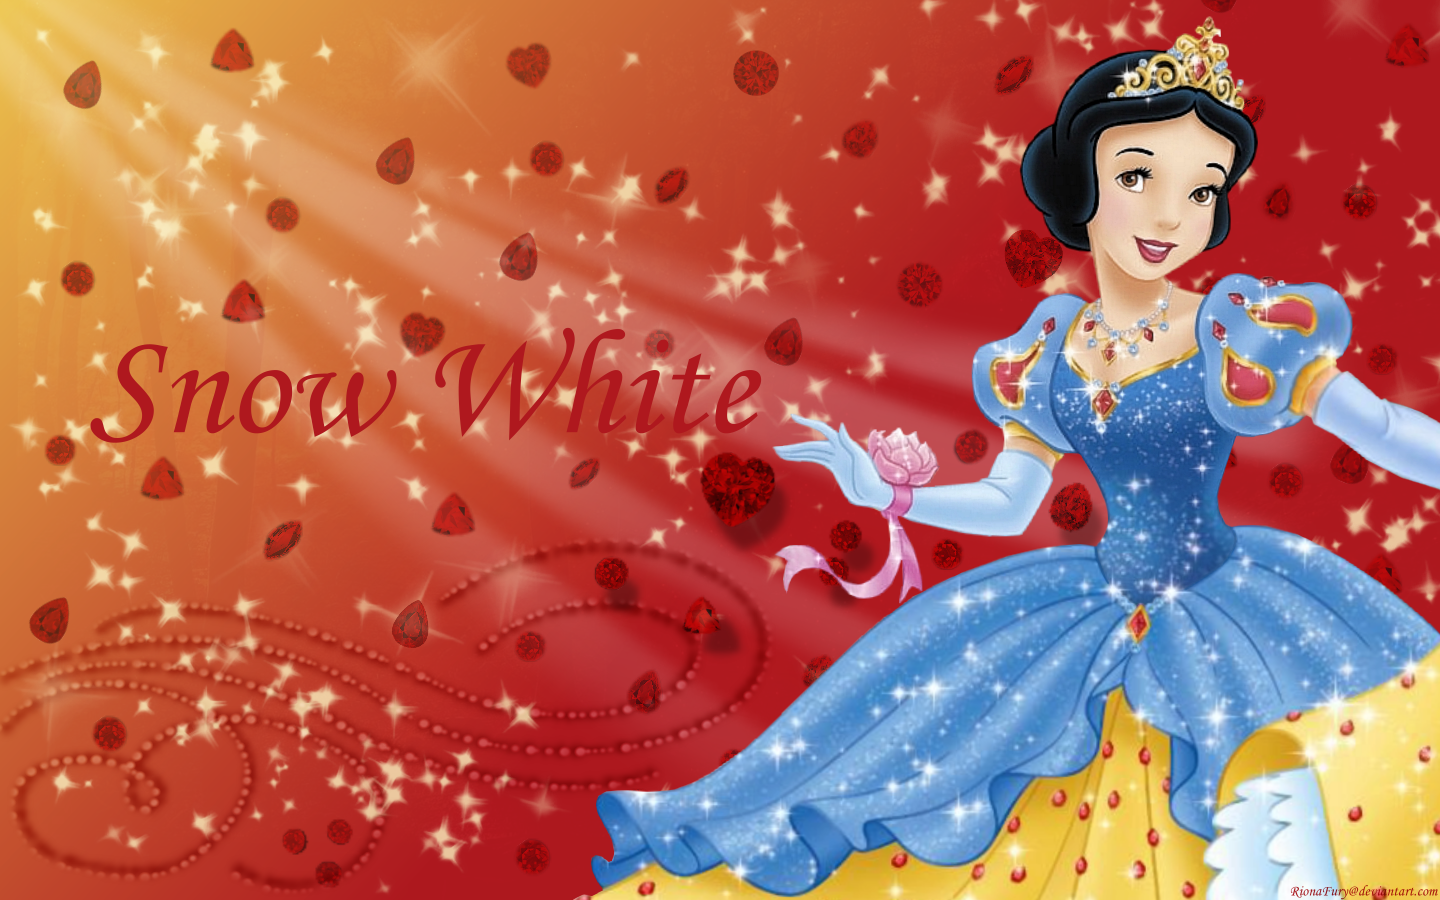 Snow White HD Wallpapers 1000 Free Snow White Wallpaper Images For All  Devices